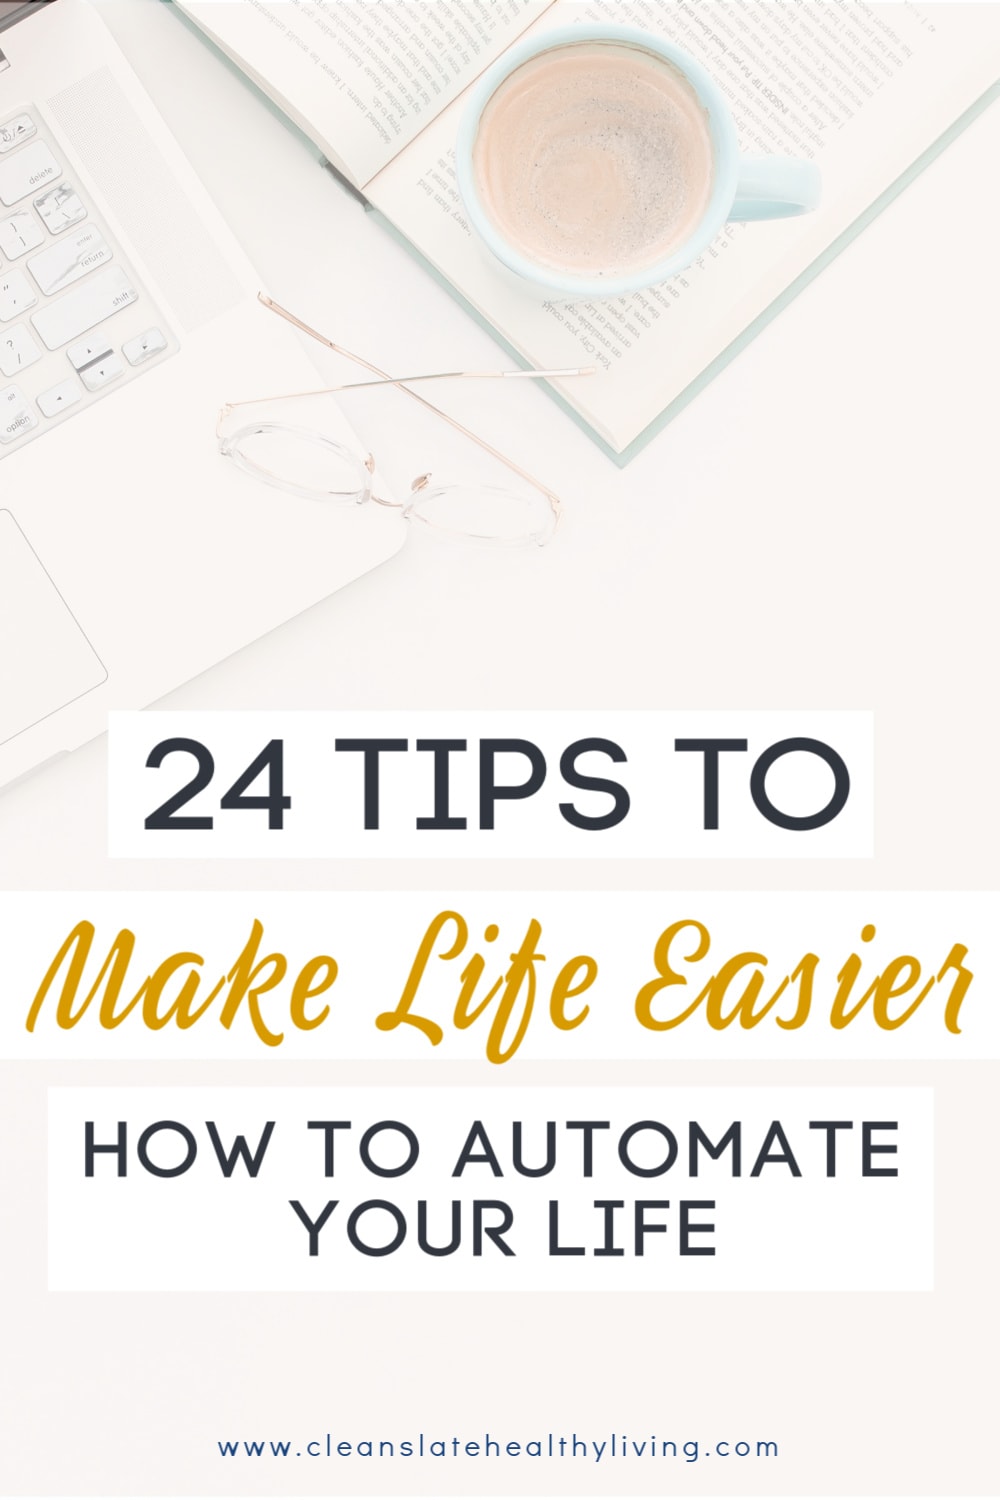 How To Automate Your Life 24 Tips To Make Life Easier Clean Slate Healthy Living